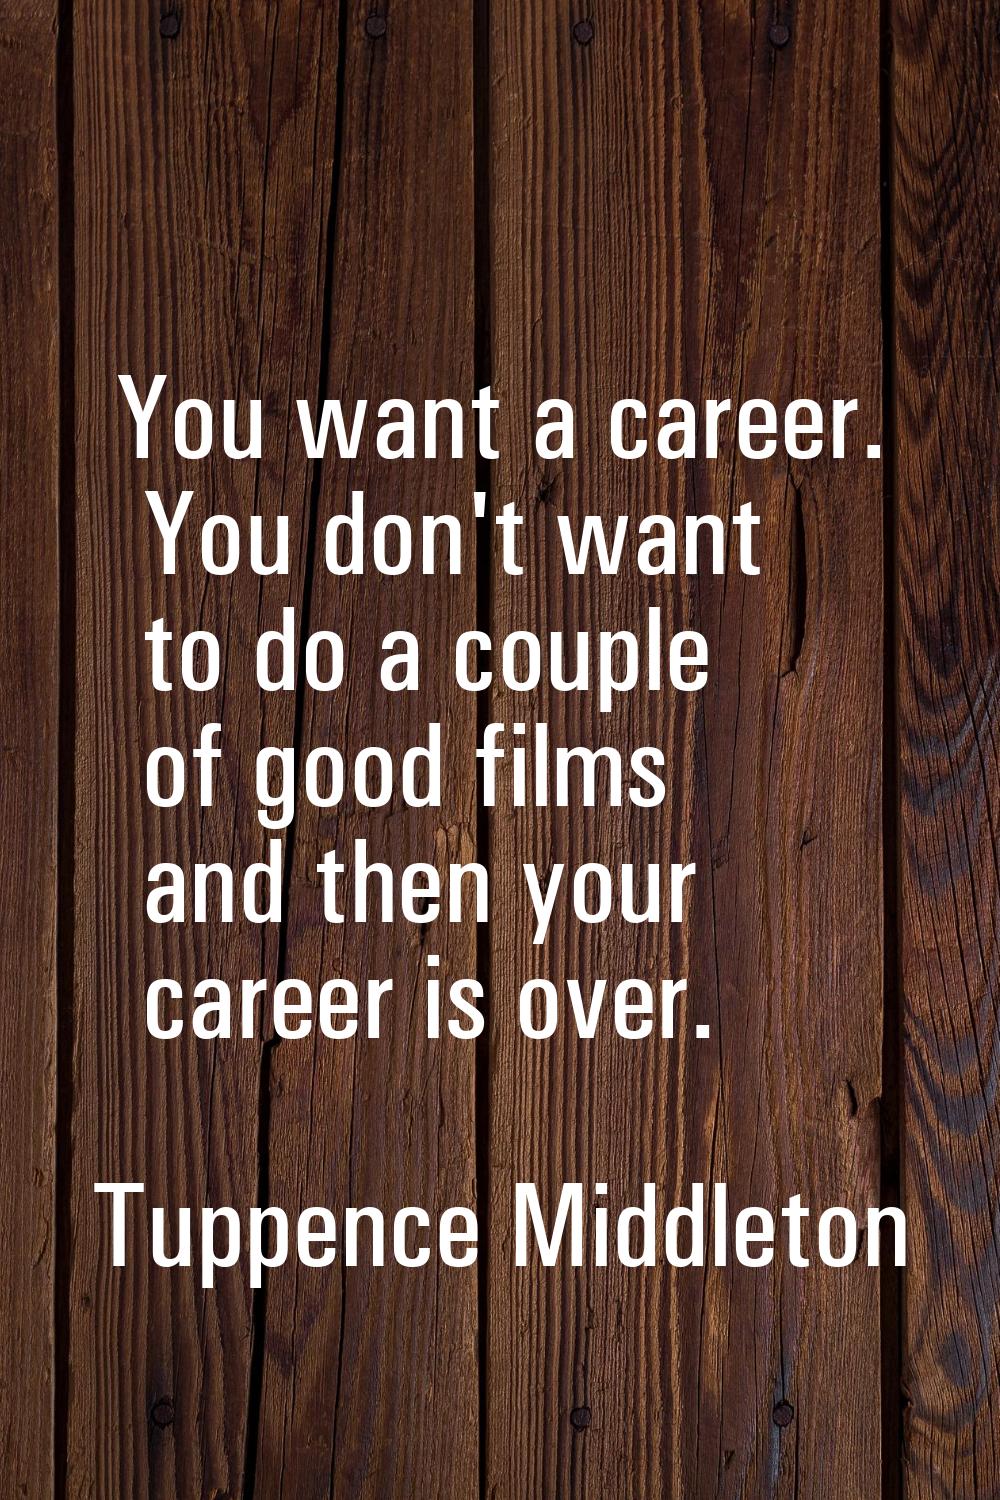 You want a career. You don't want to do a couple of good films and then your career is over.